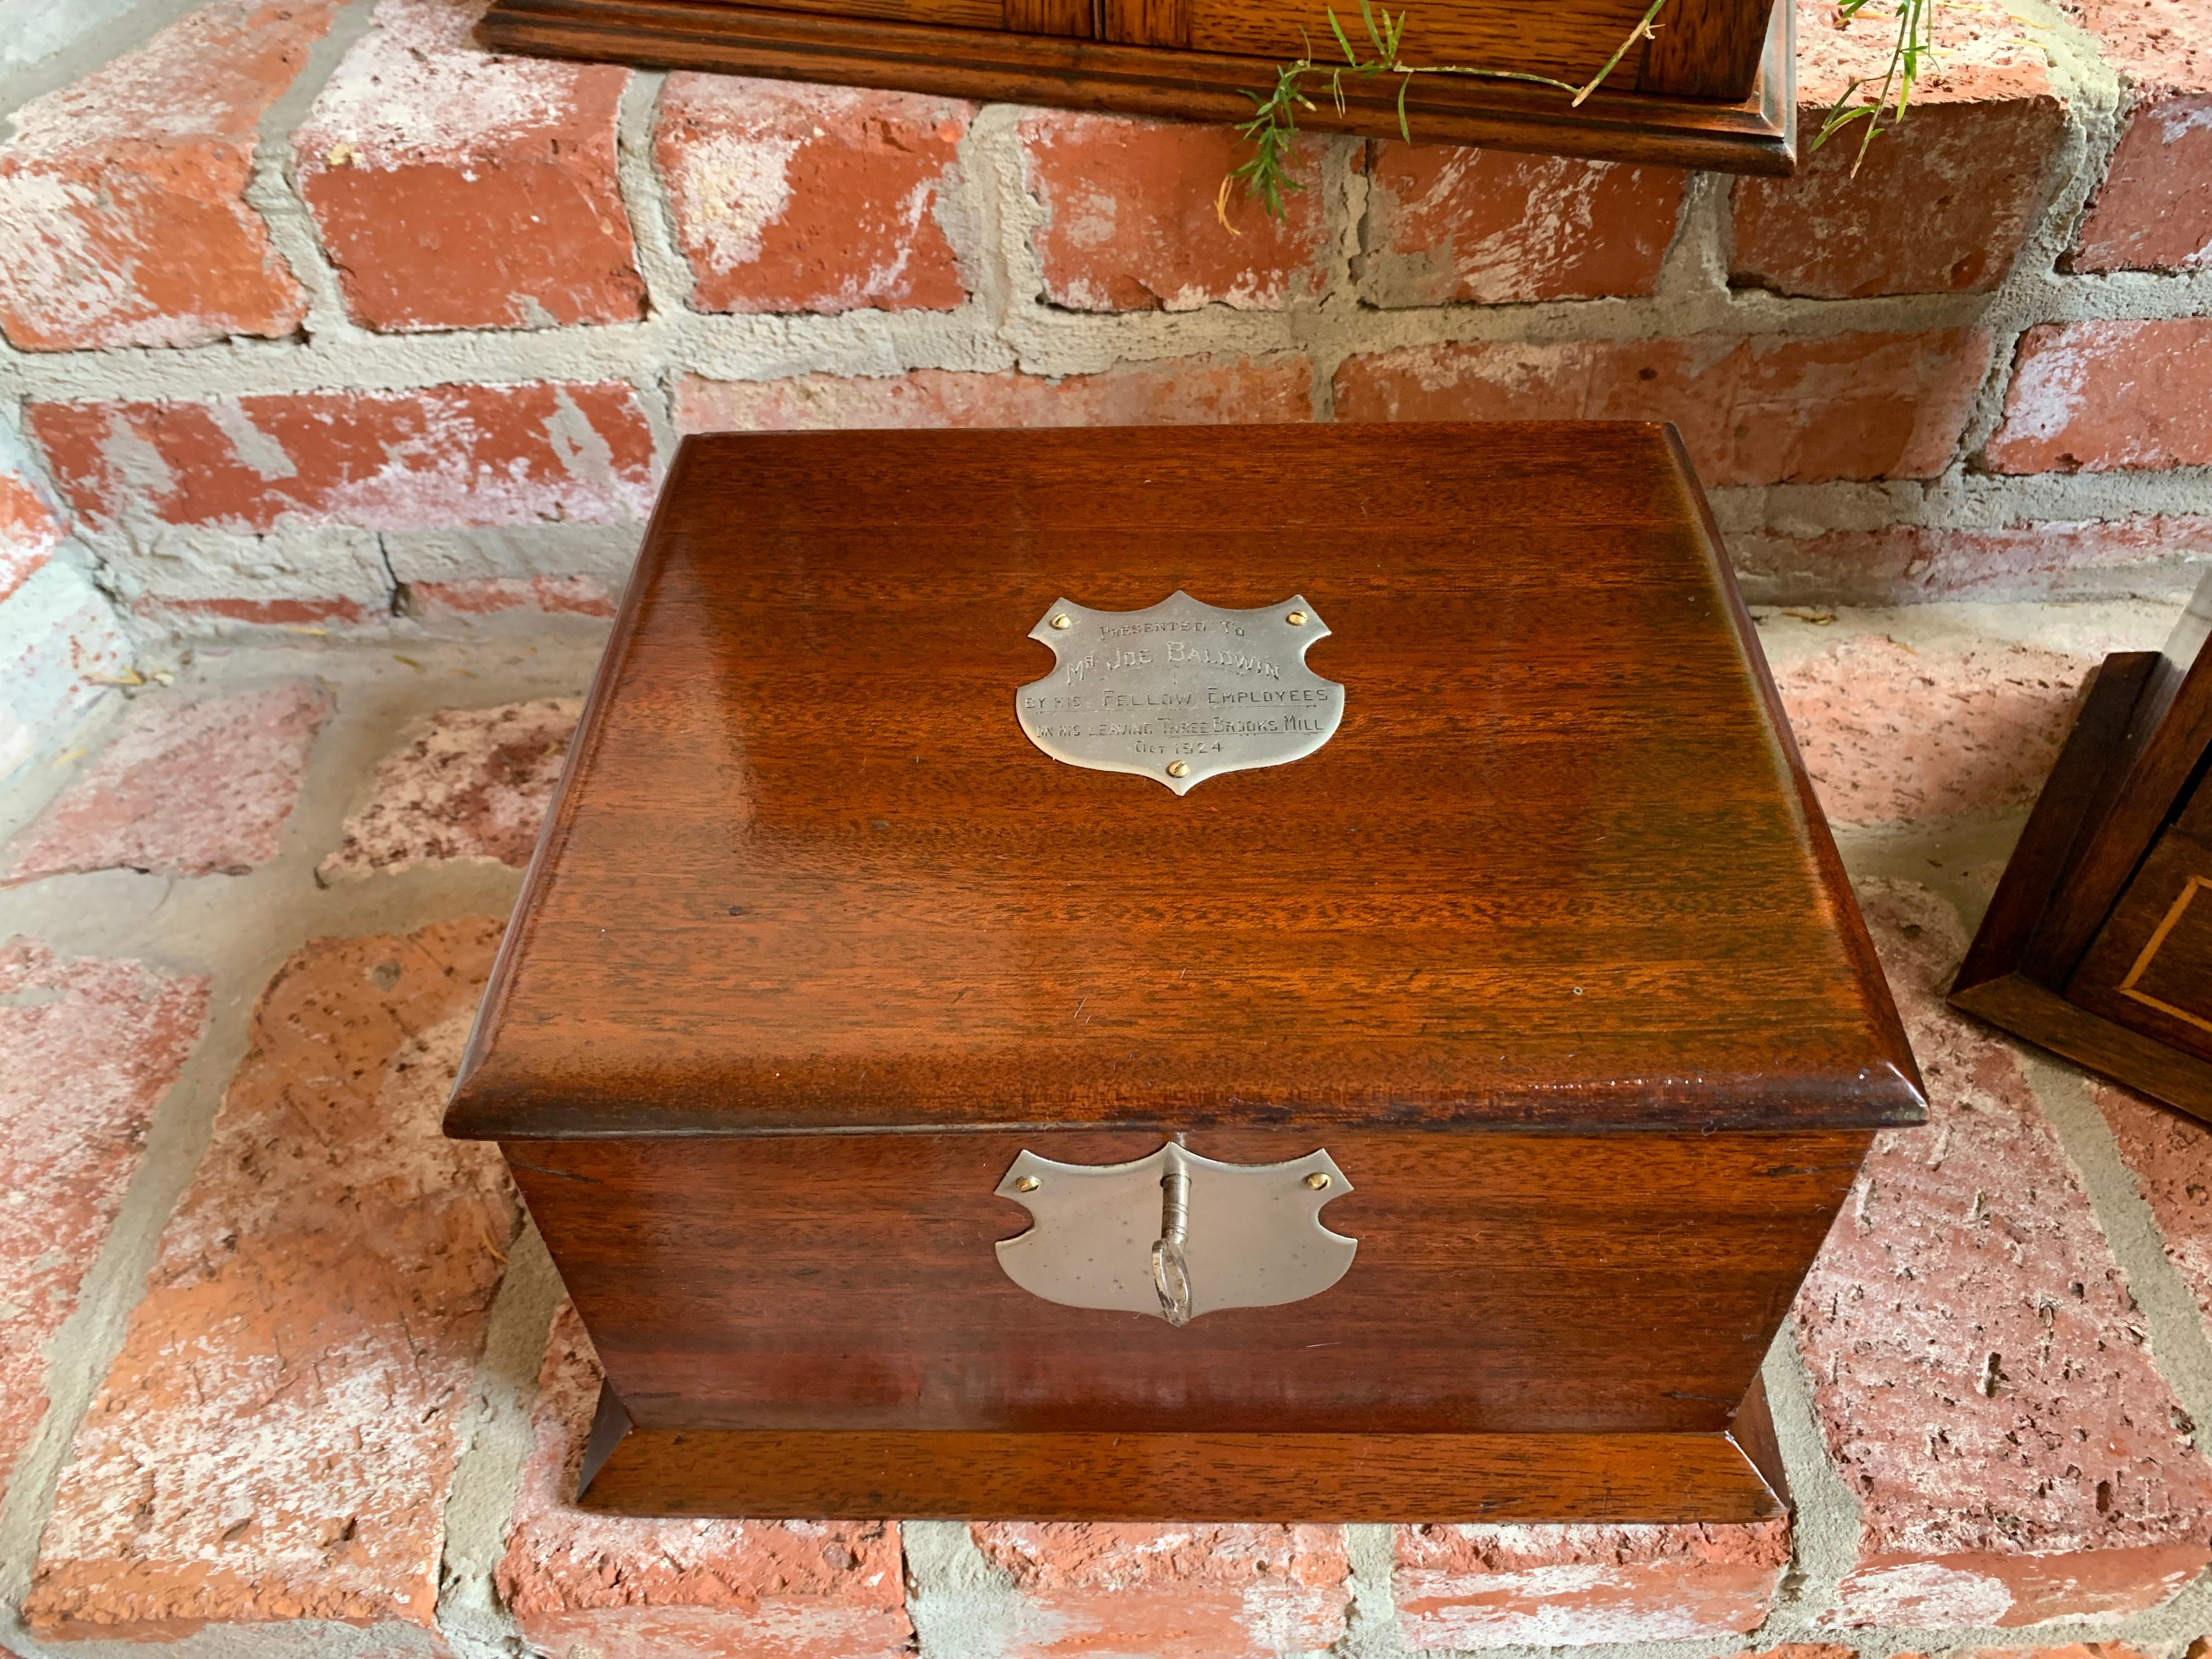 ~ Direct from England
~ From our most recent buying trip, we have an entire collection of antique English “gentleman’s cabinets”!! Many have dated, engraved presentation plaques, and all of them are fabulous!
~ Typically these boxes were used for